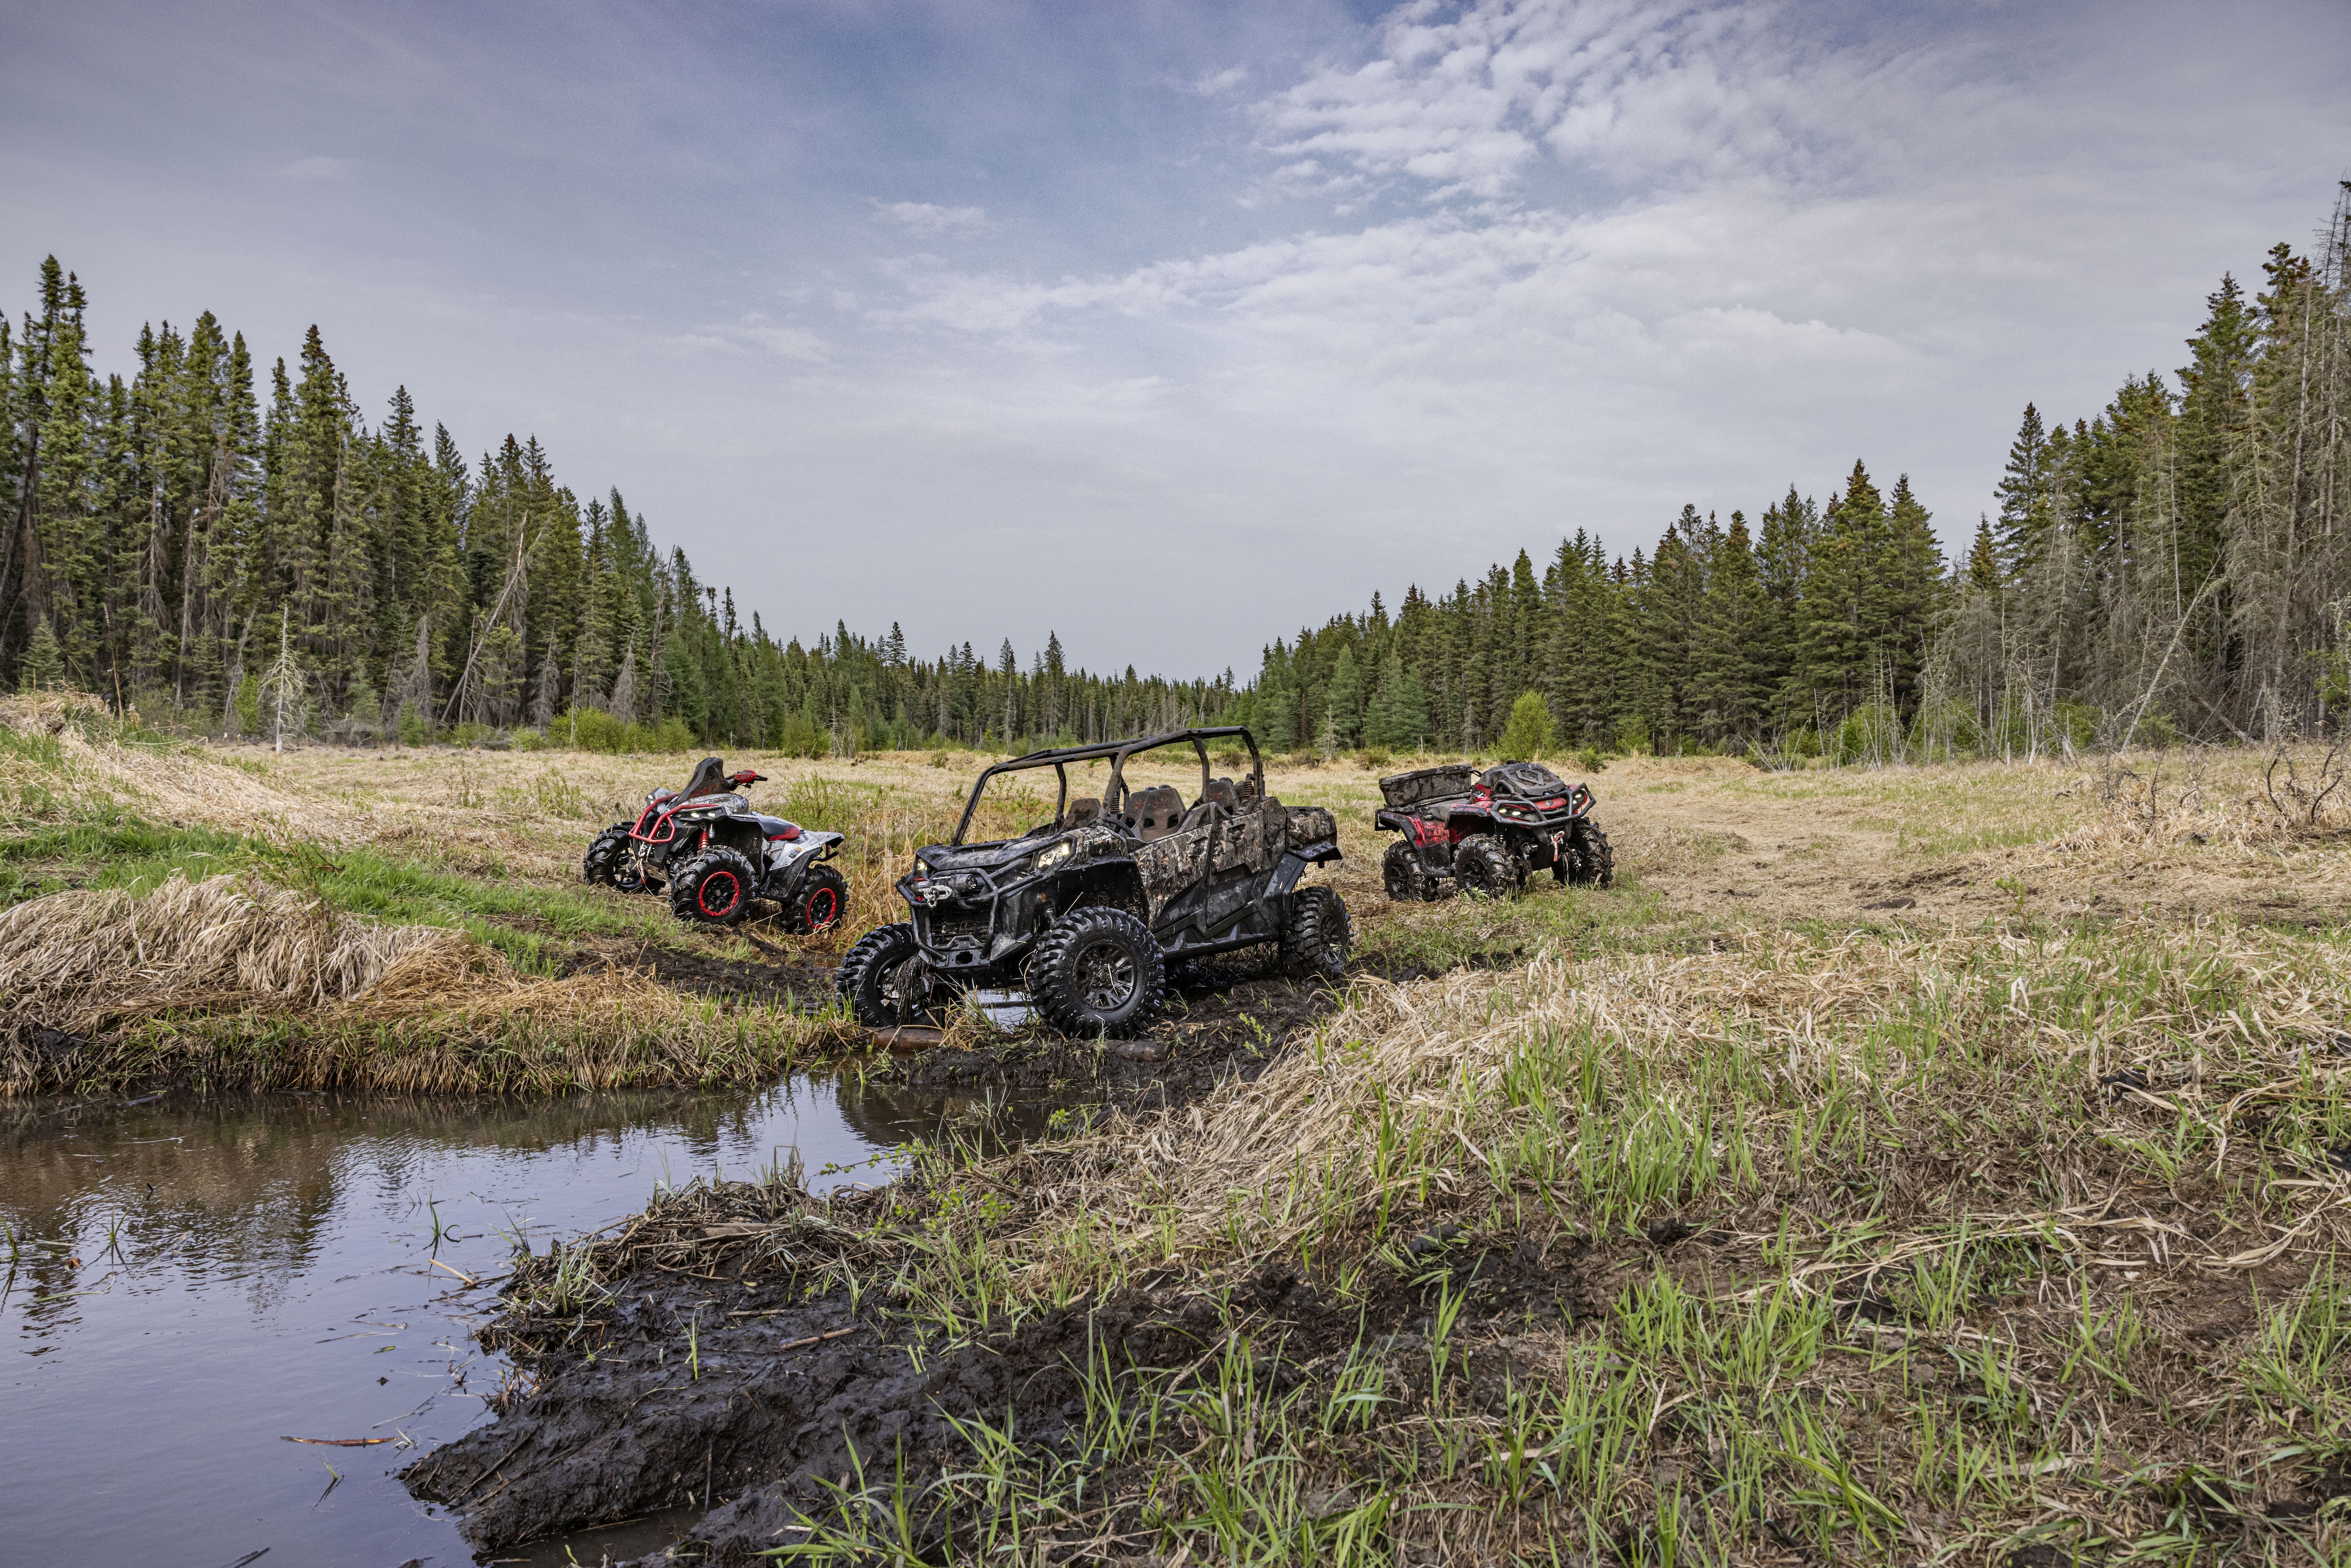 All Can-Am ATV models in a field